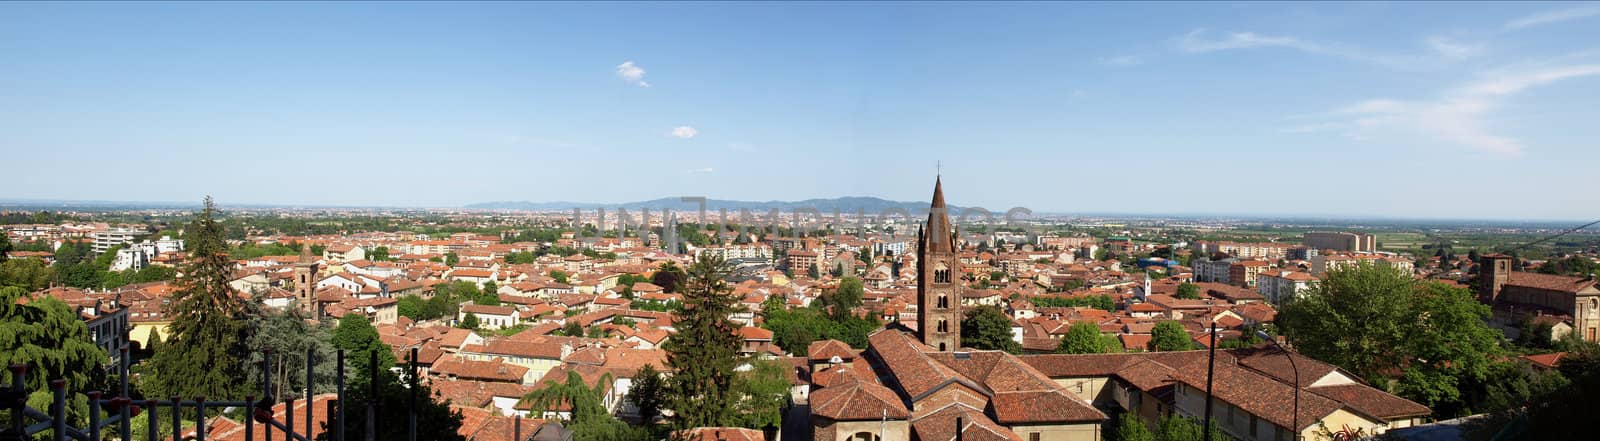 View of the town of Turin in Piedmont, Italy